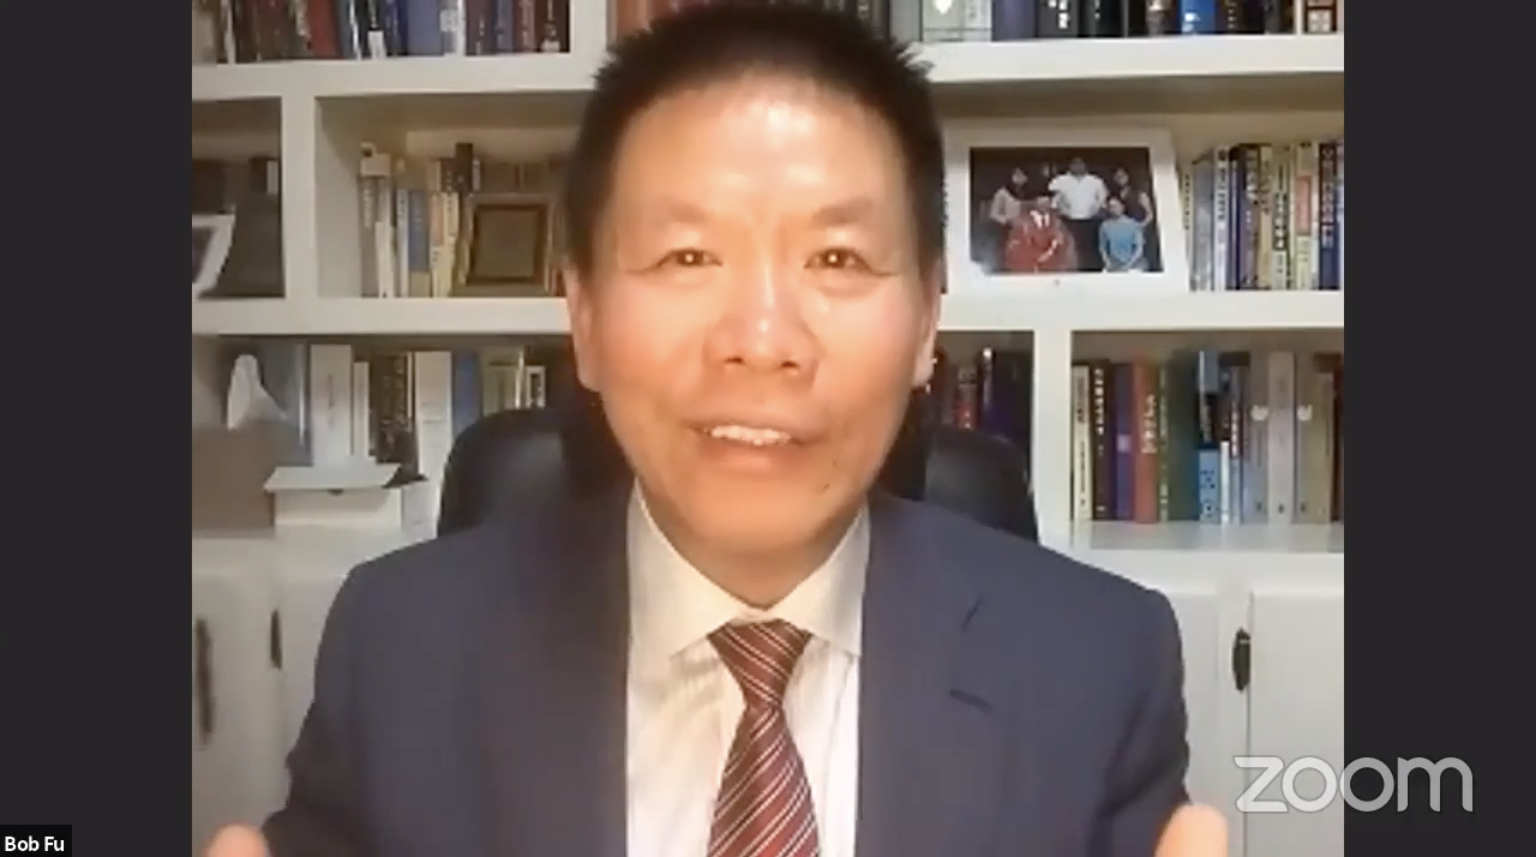 Bob Fu, president of ChinaAid and a Christian convert from China